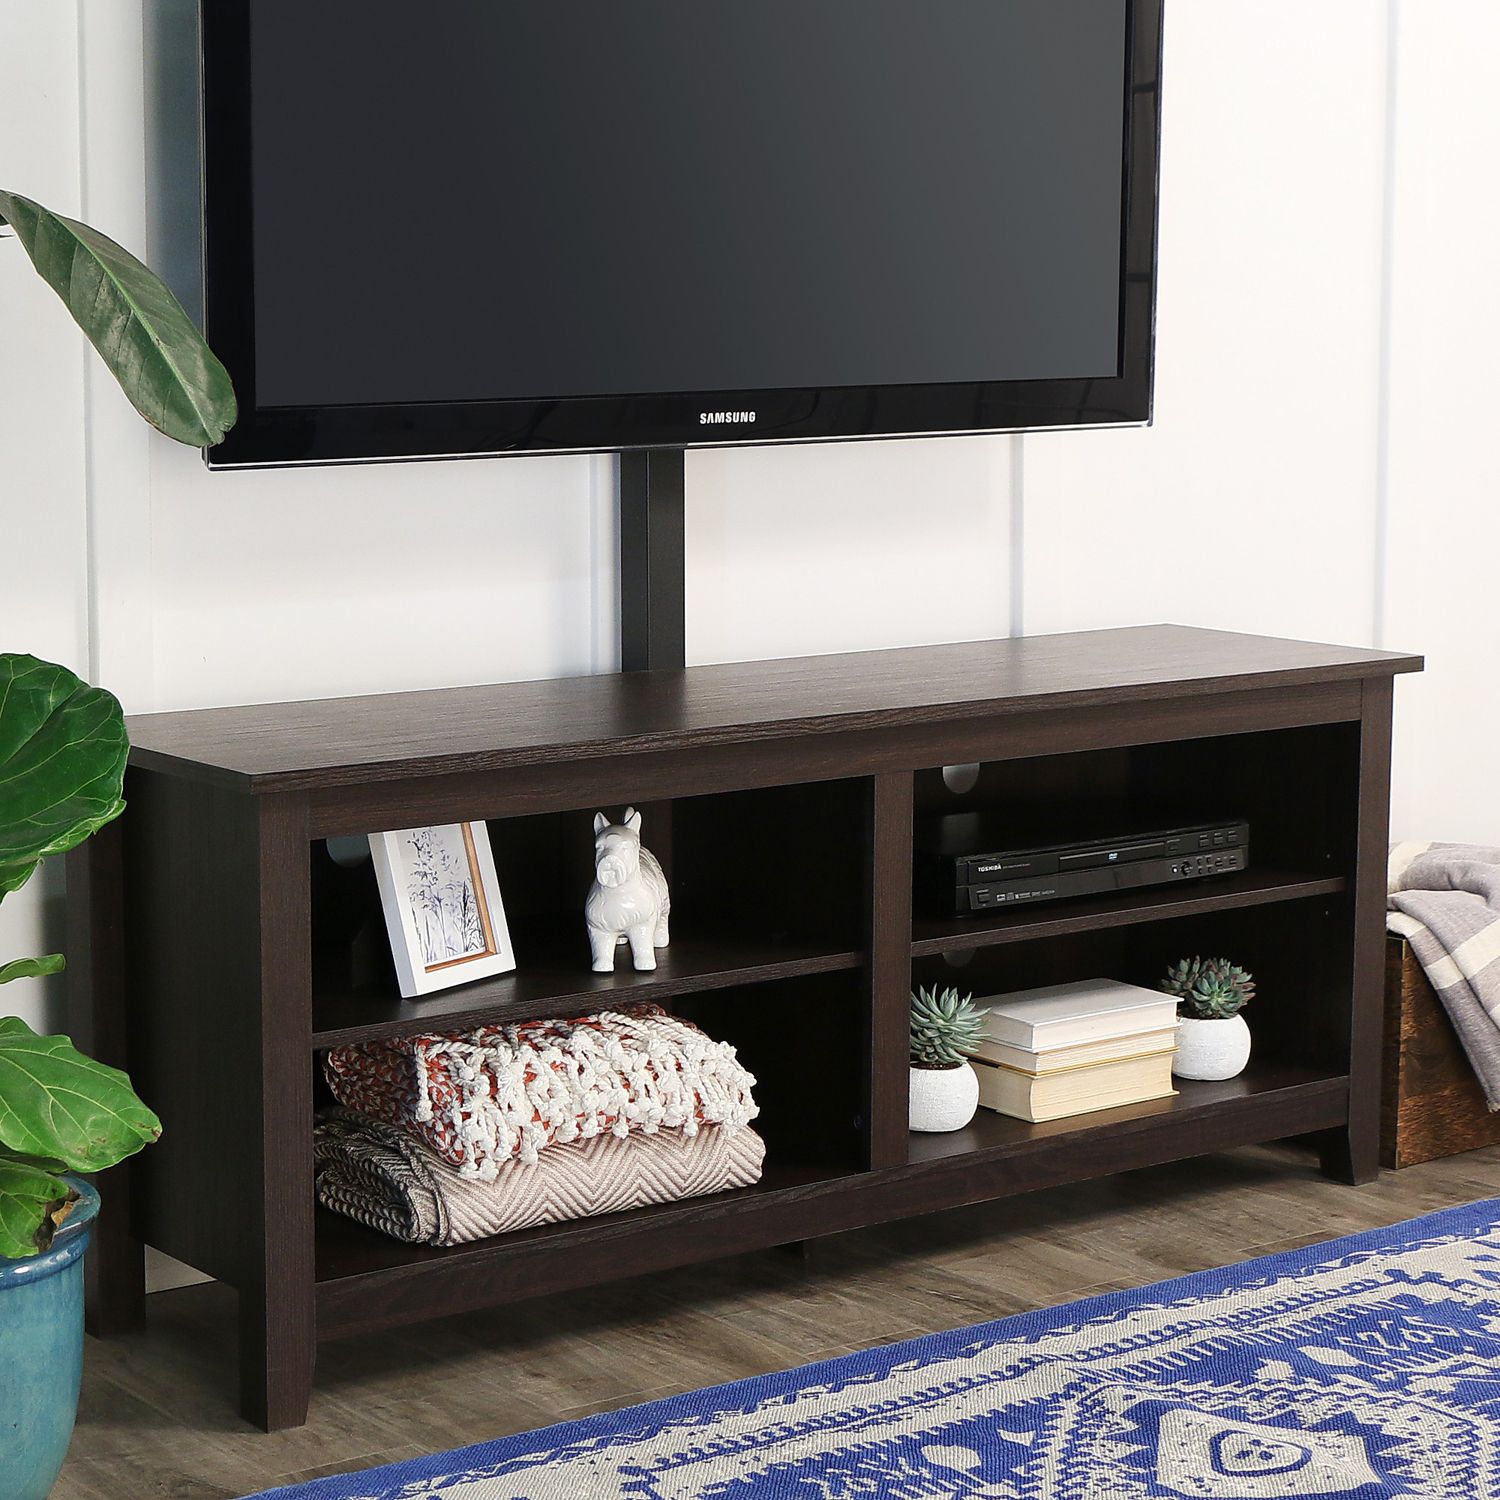 58" Espresso Tv Stand Console With Mount – Pier1 Imports Within Farmhouse Tv Stands For 75" Flat Screen With Console Table Storage Cabinet (View 3 of 15)